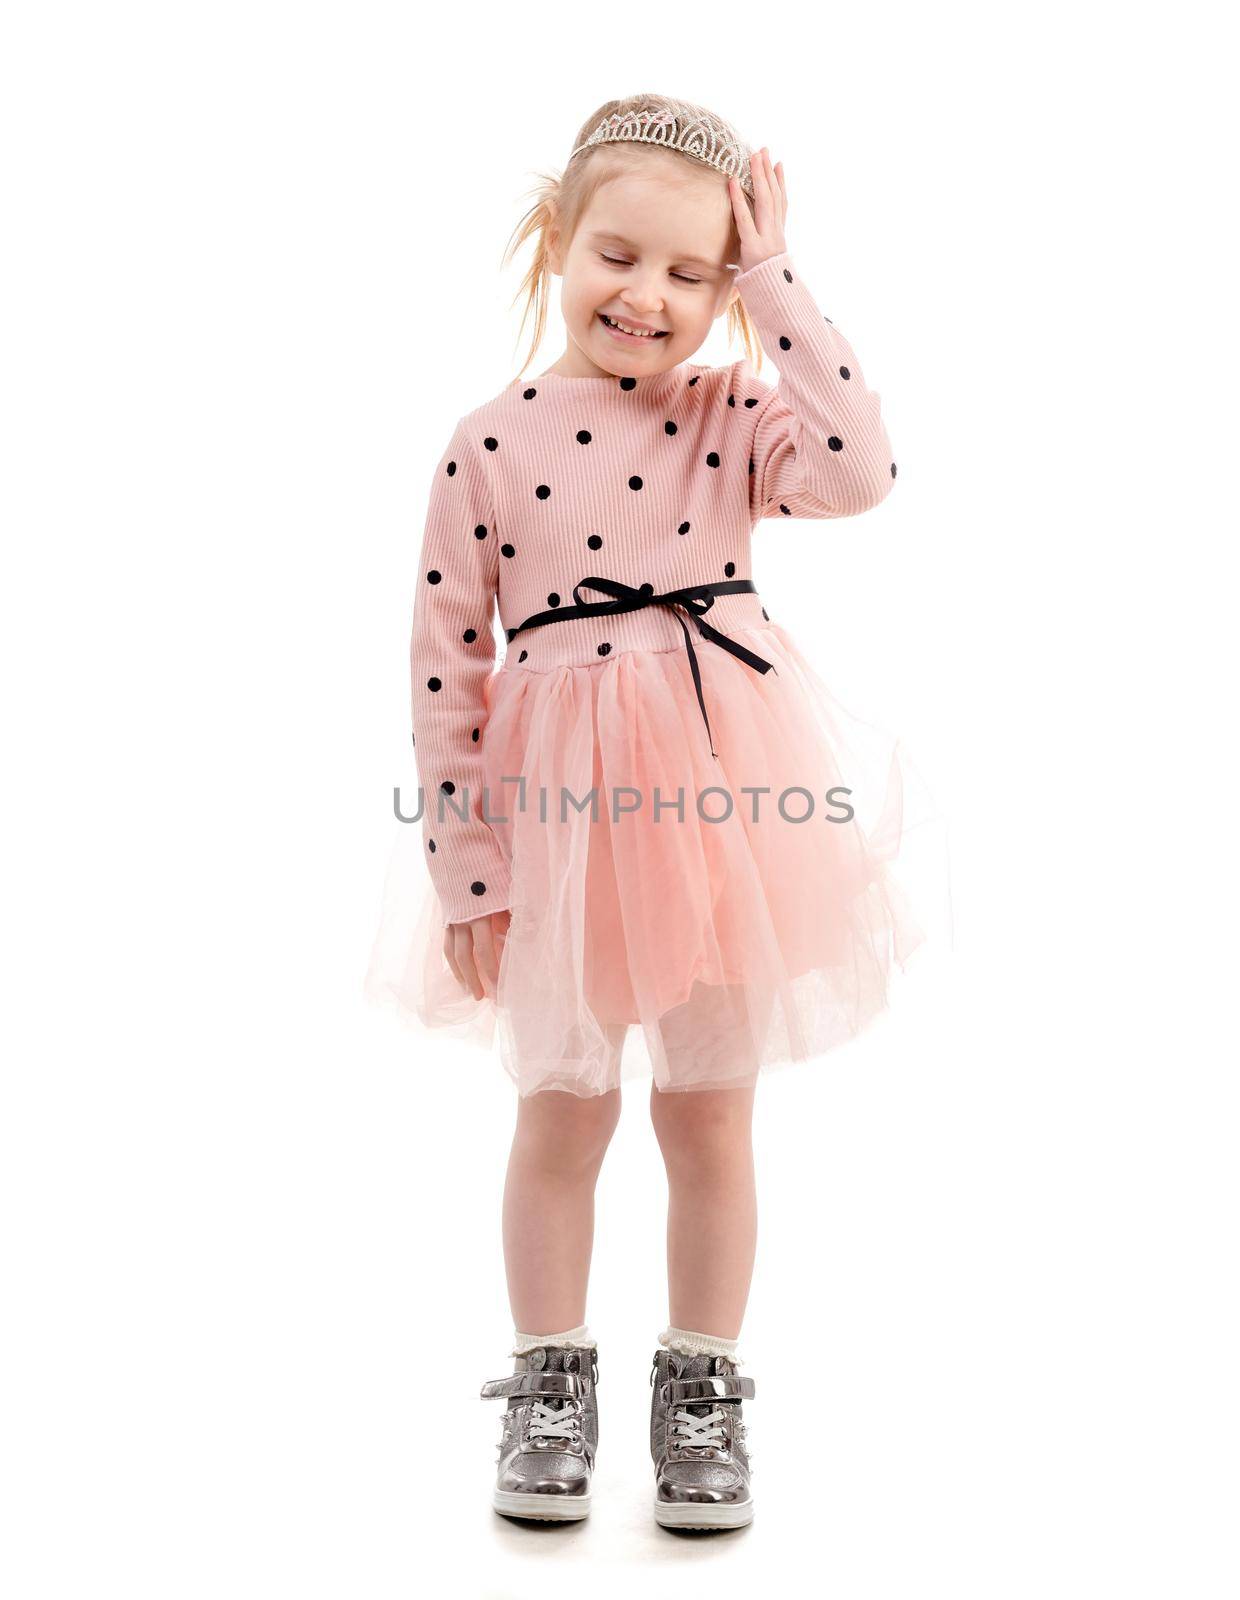 Lovely kid wearing a princess crown dressed in cute pink outfit, smiling widely